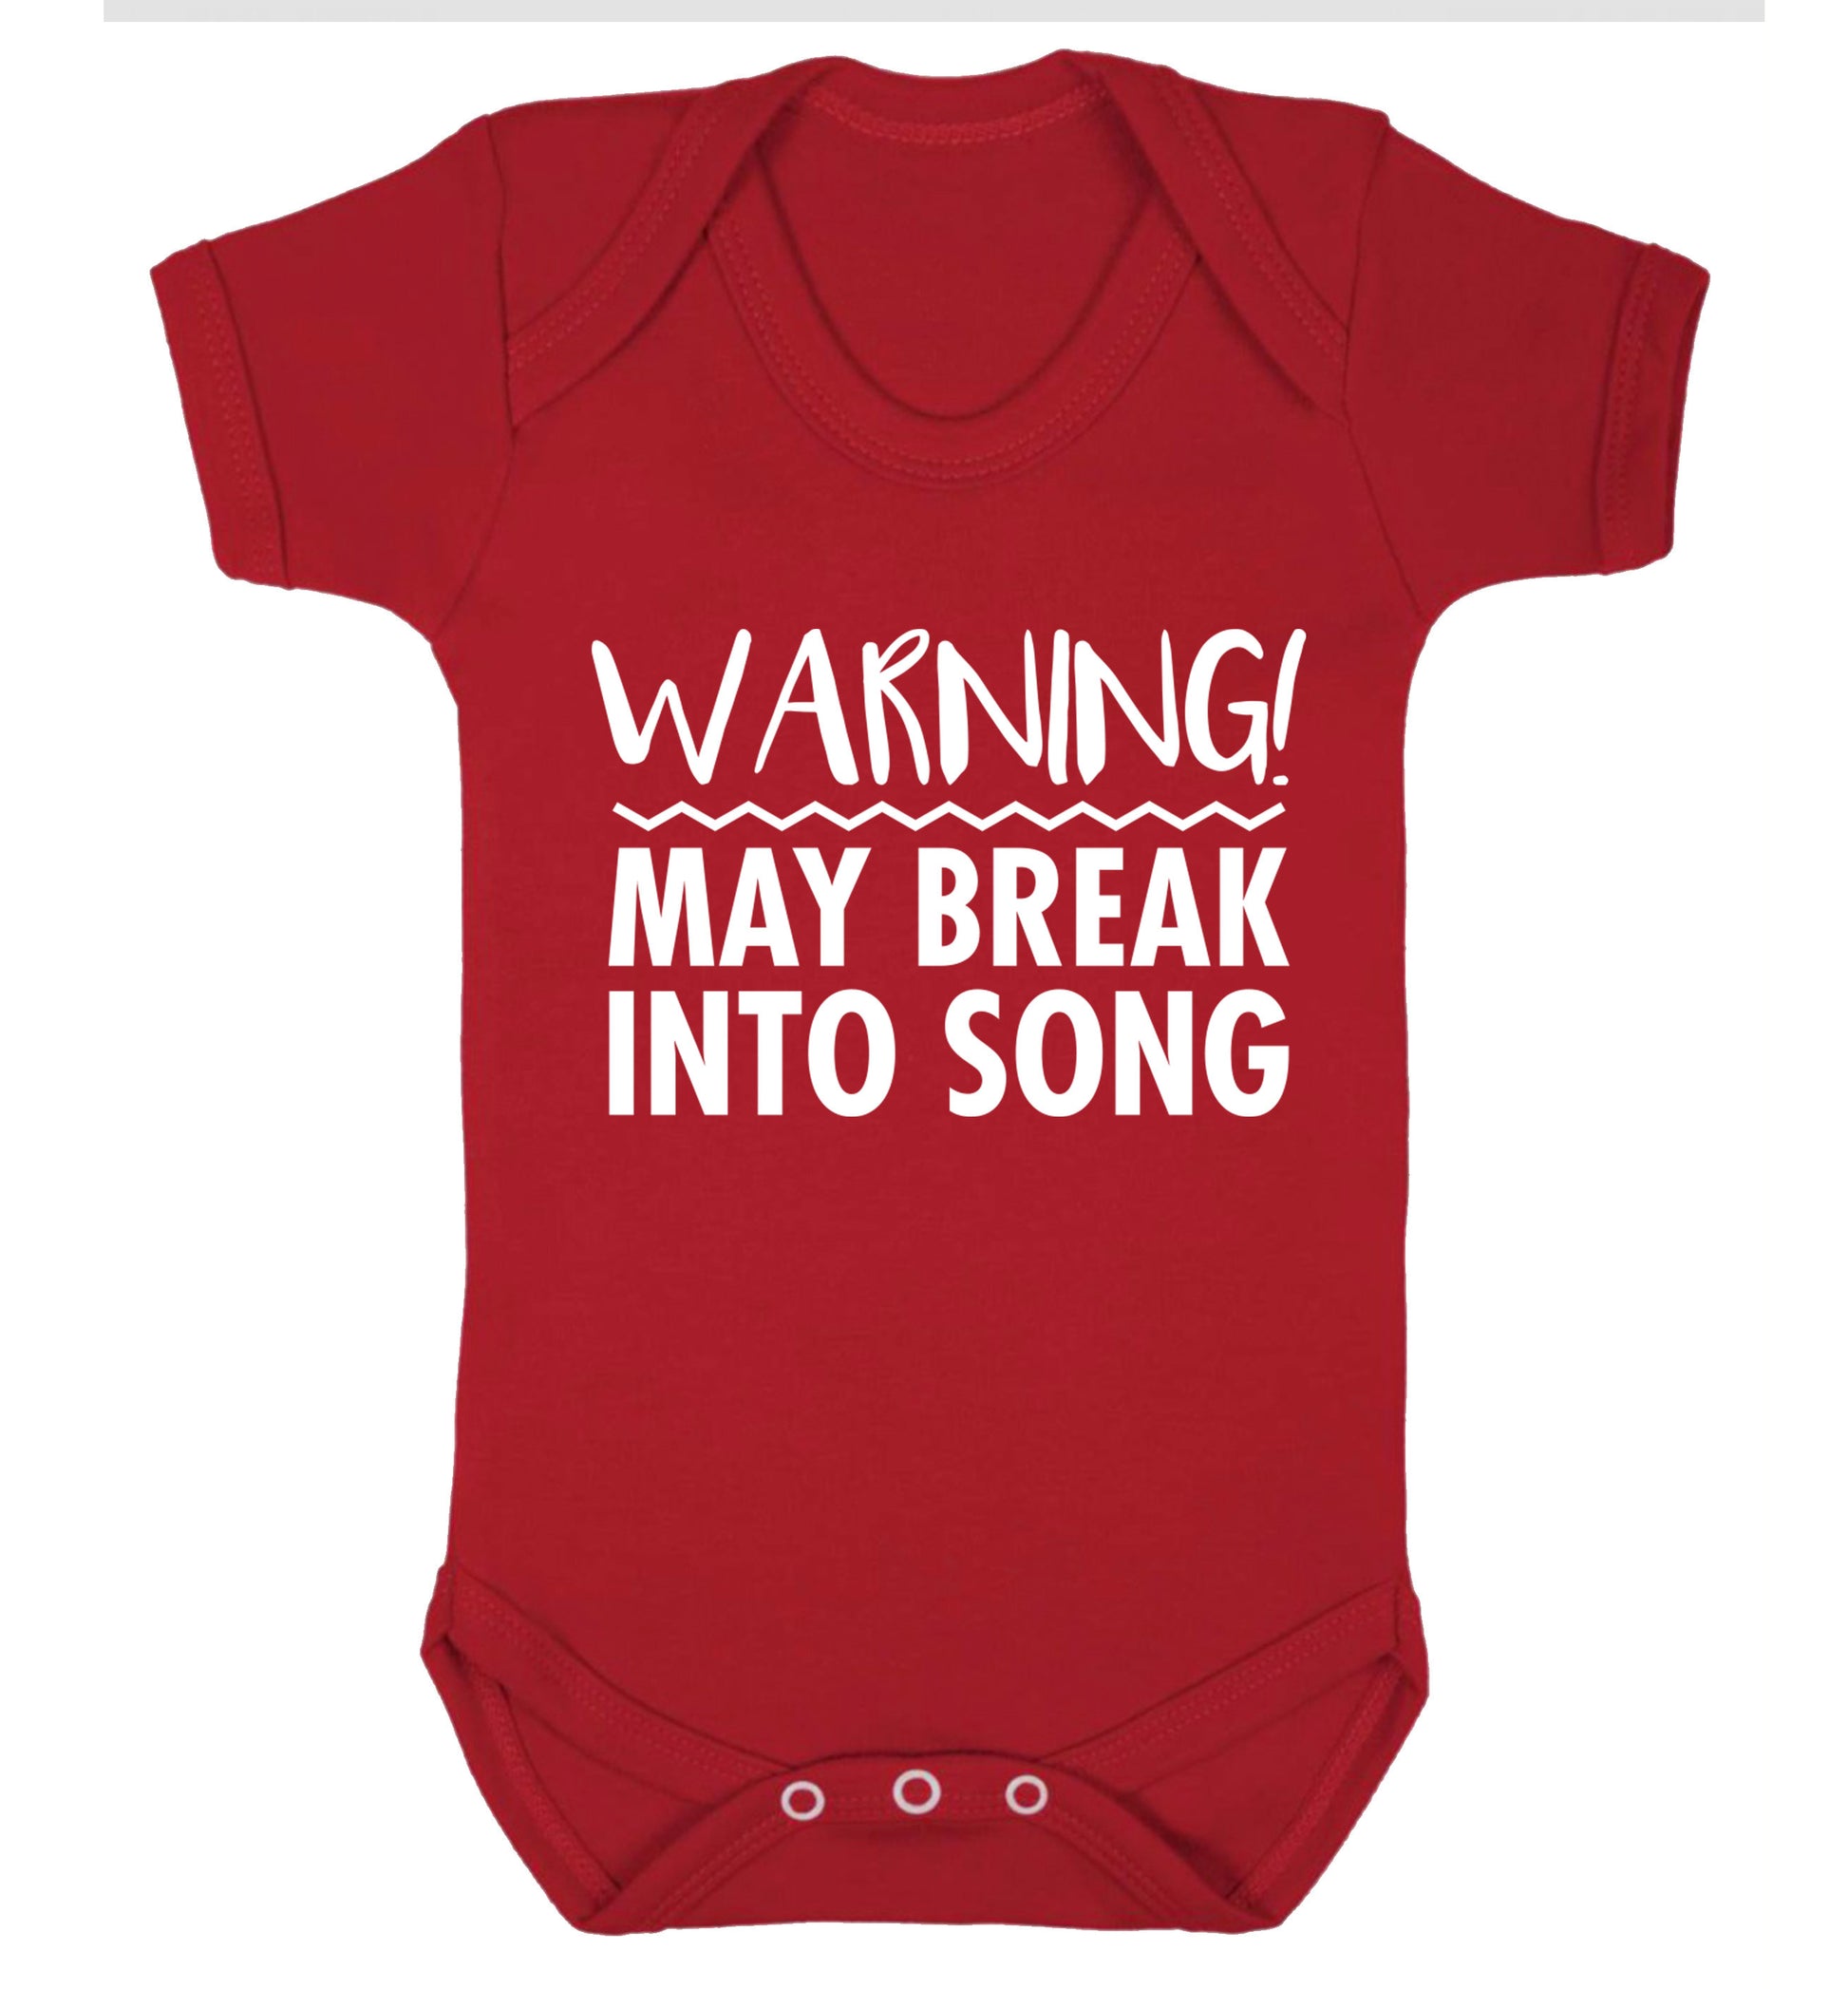 Warning may break into song Baby Vest red 18-24 months